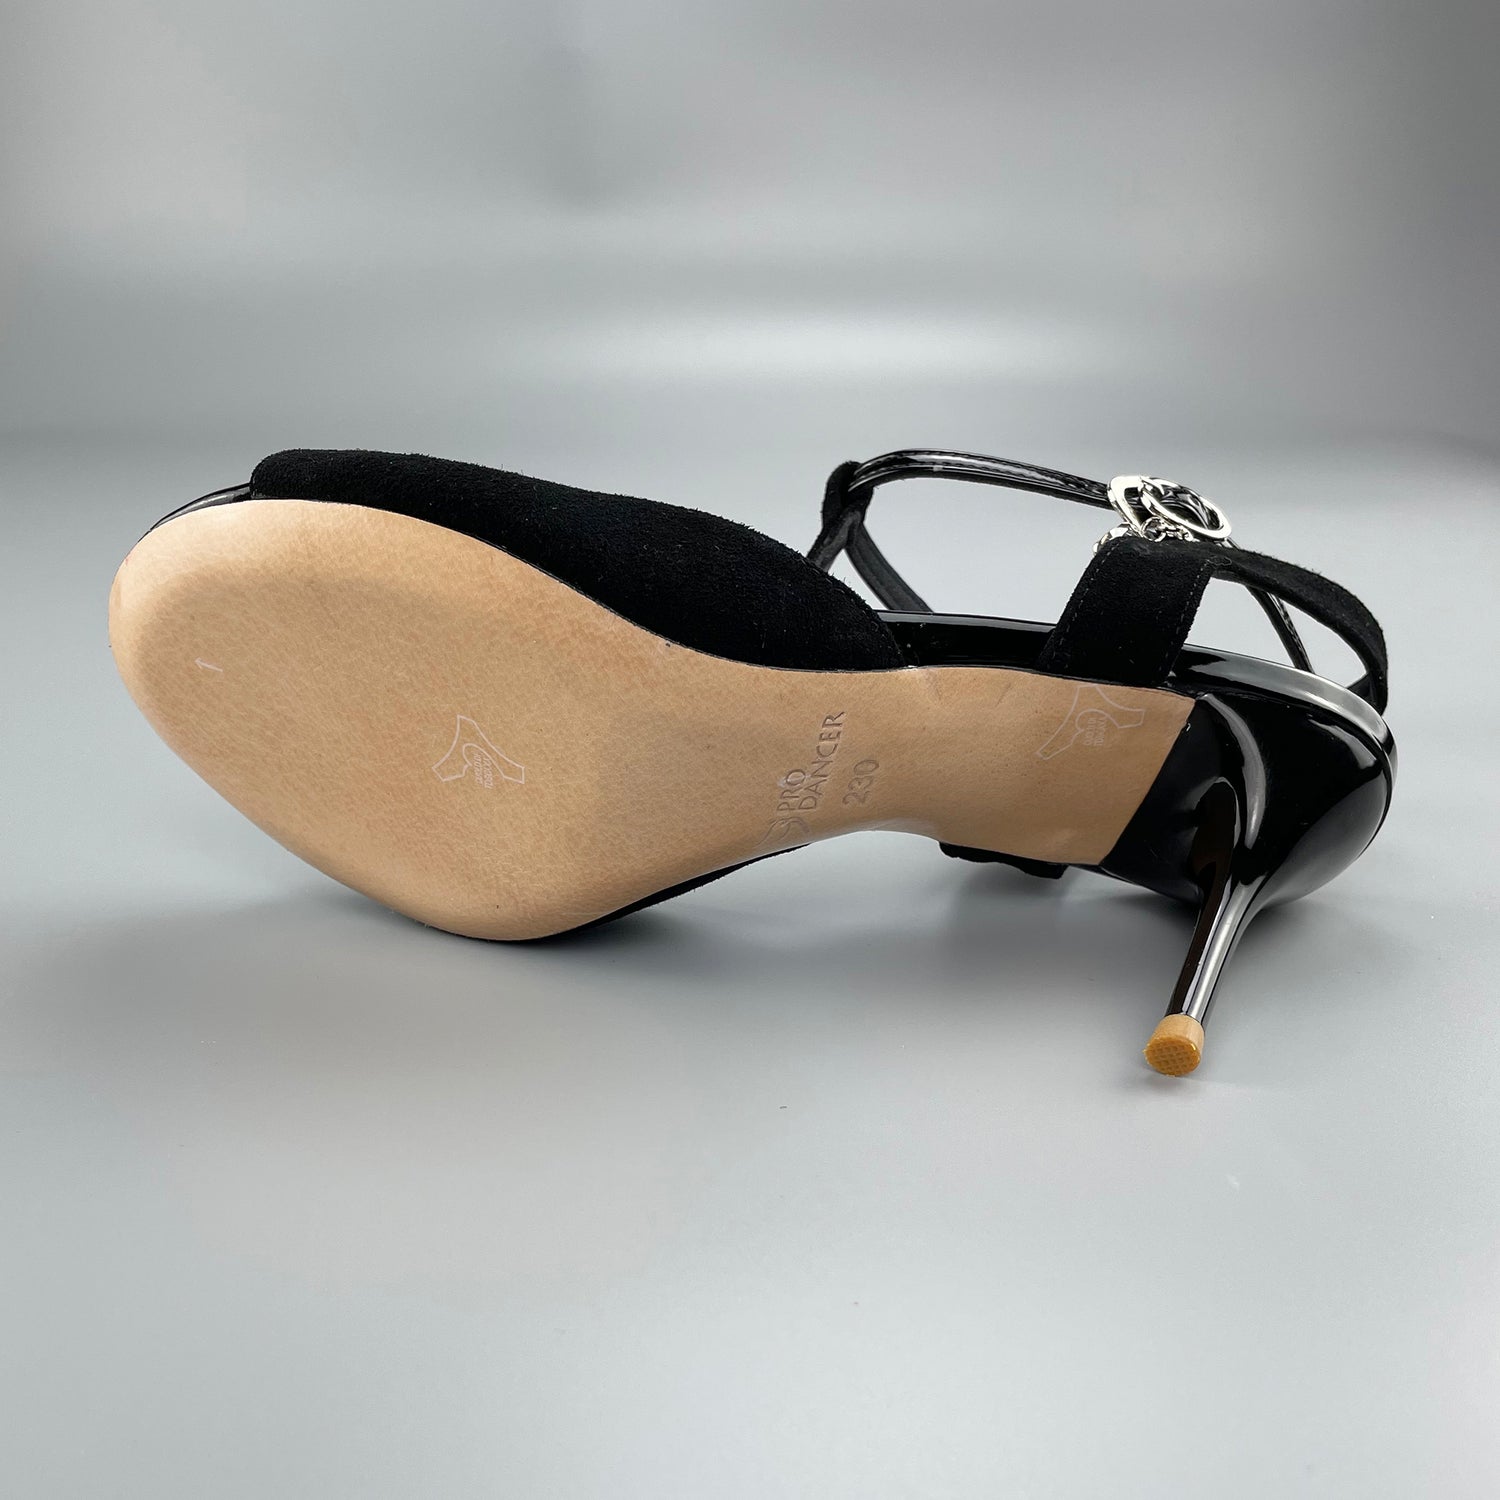 Pro Dancer open-toe and open-back Argentine Tango shoes with high salsa heels and hard leather sole sandals in black (PD-9046A)1